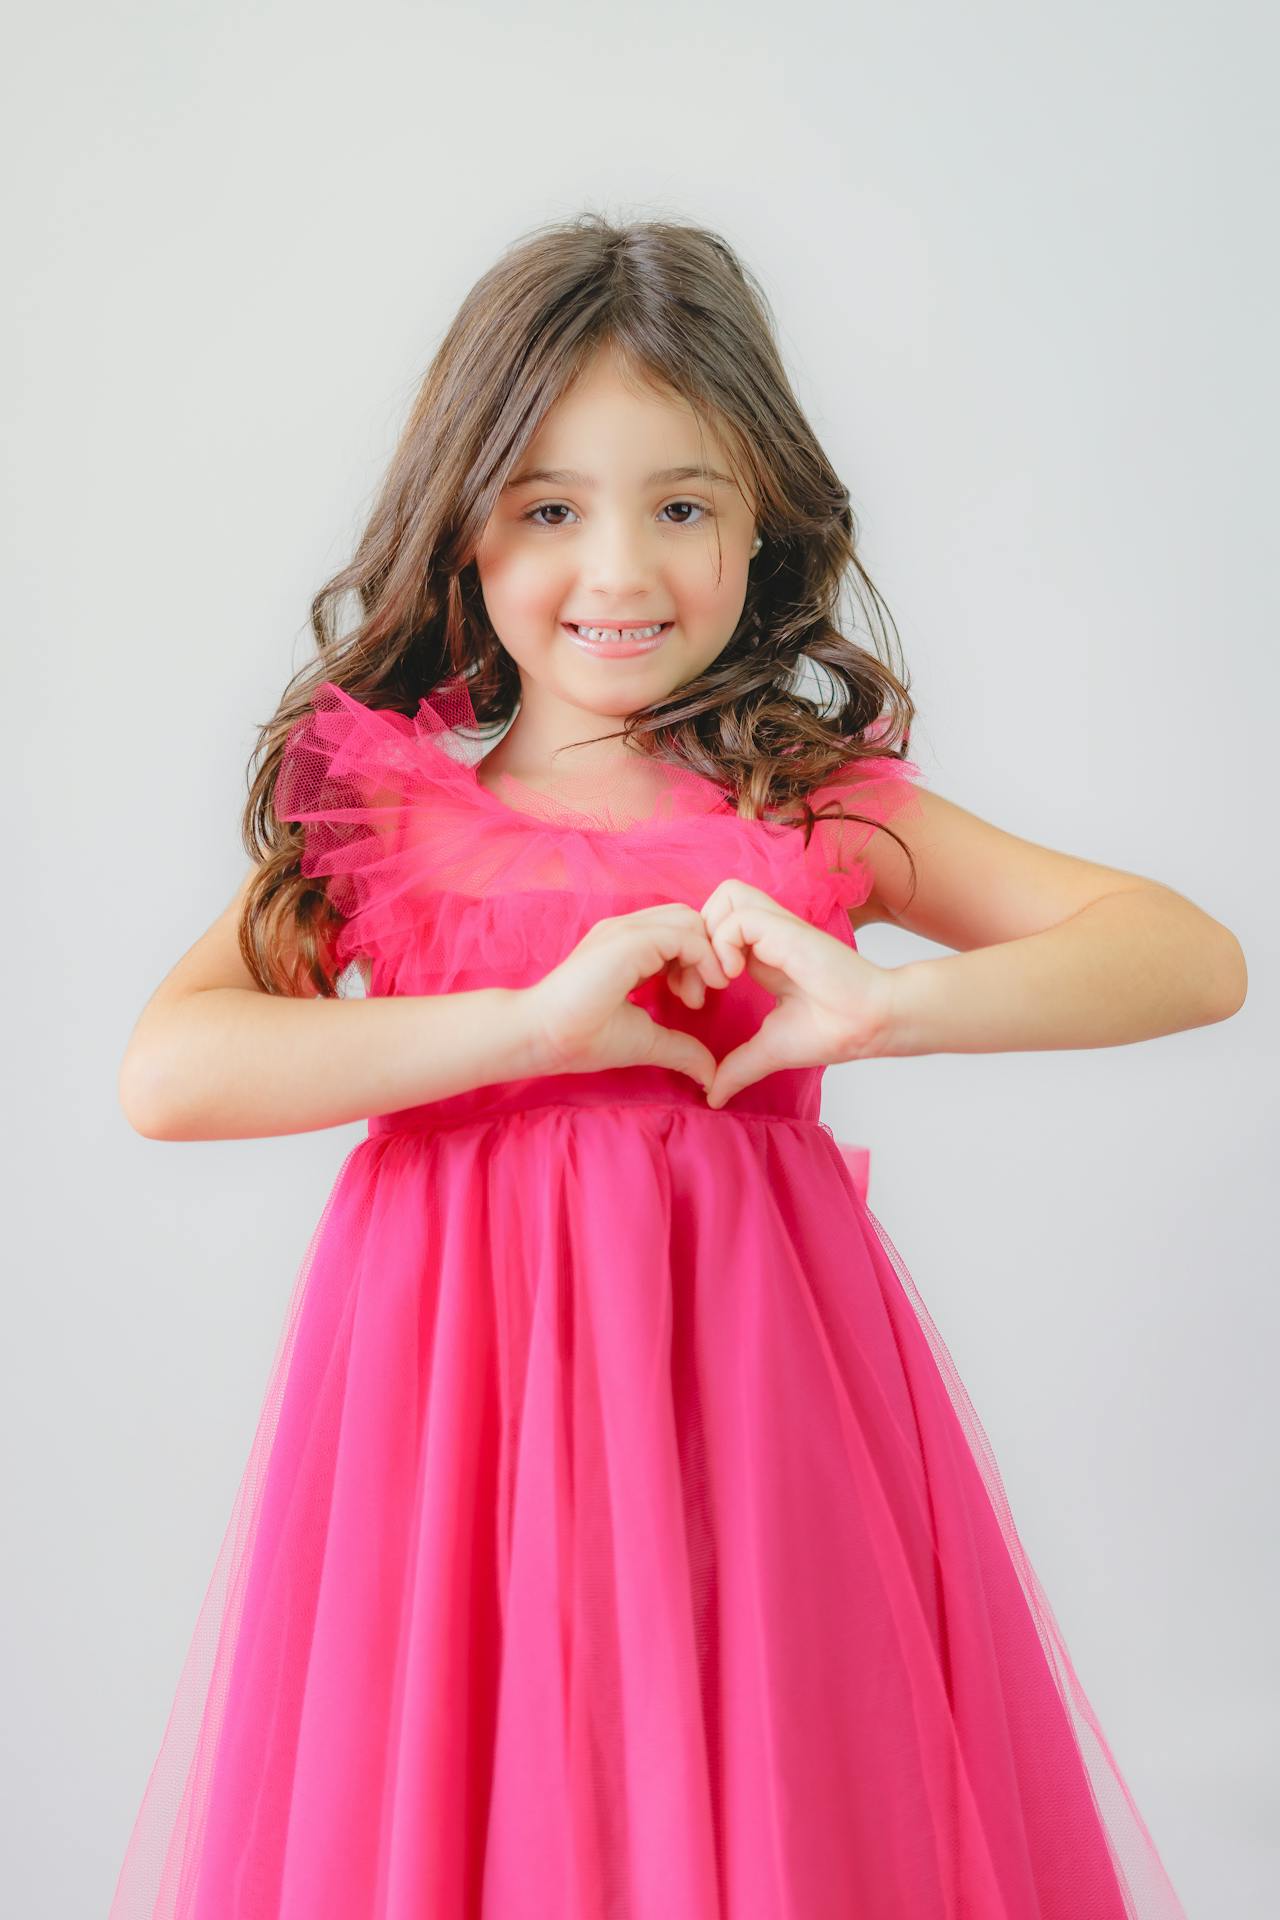 A young girl in a pink dress | Source: Pexels